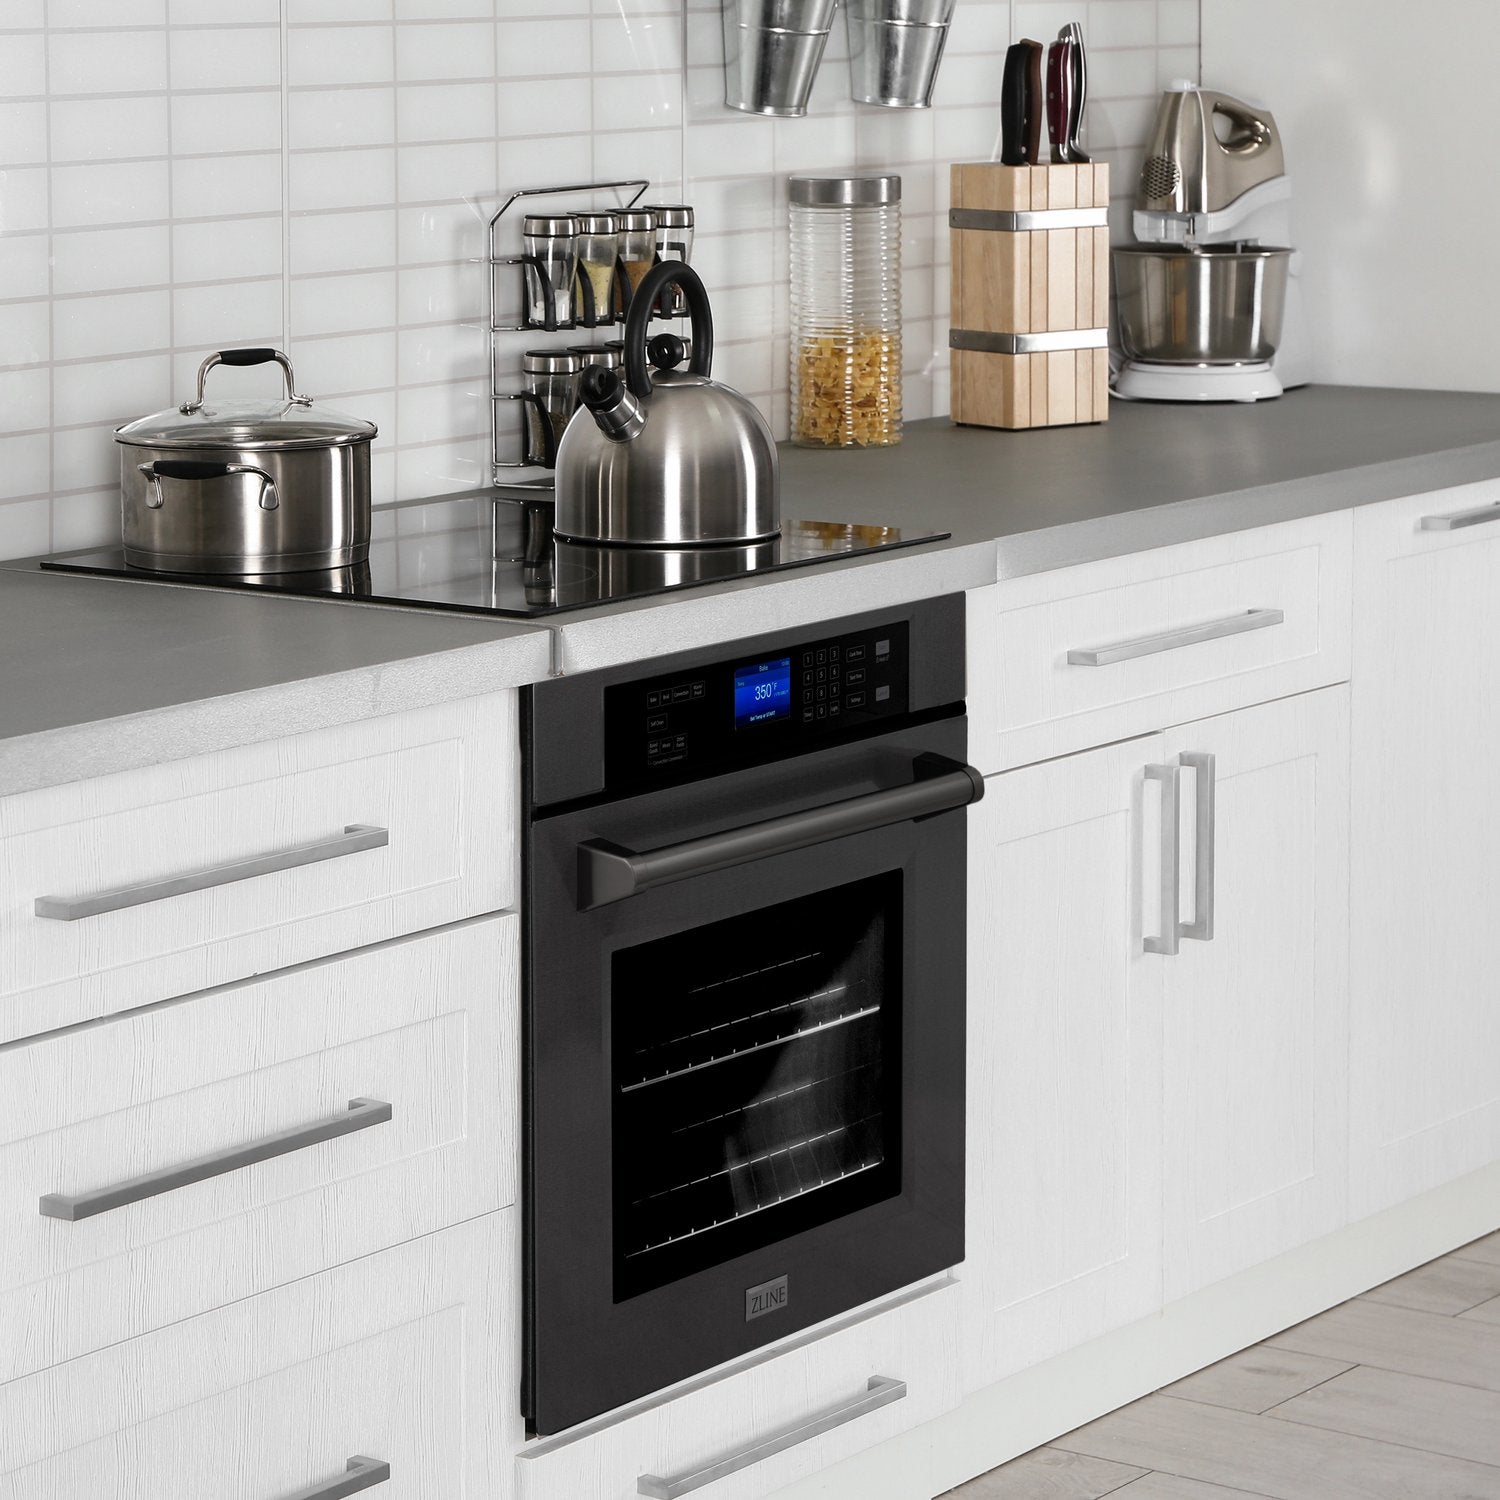 ZLINE single wall oven below induction cooktop in a compact kitchen